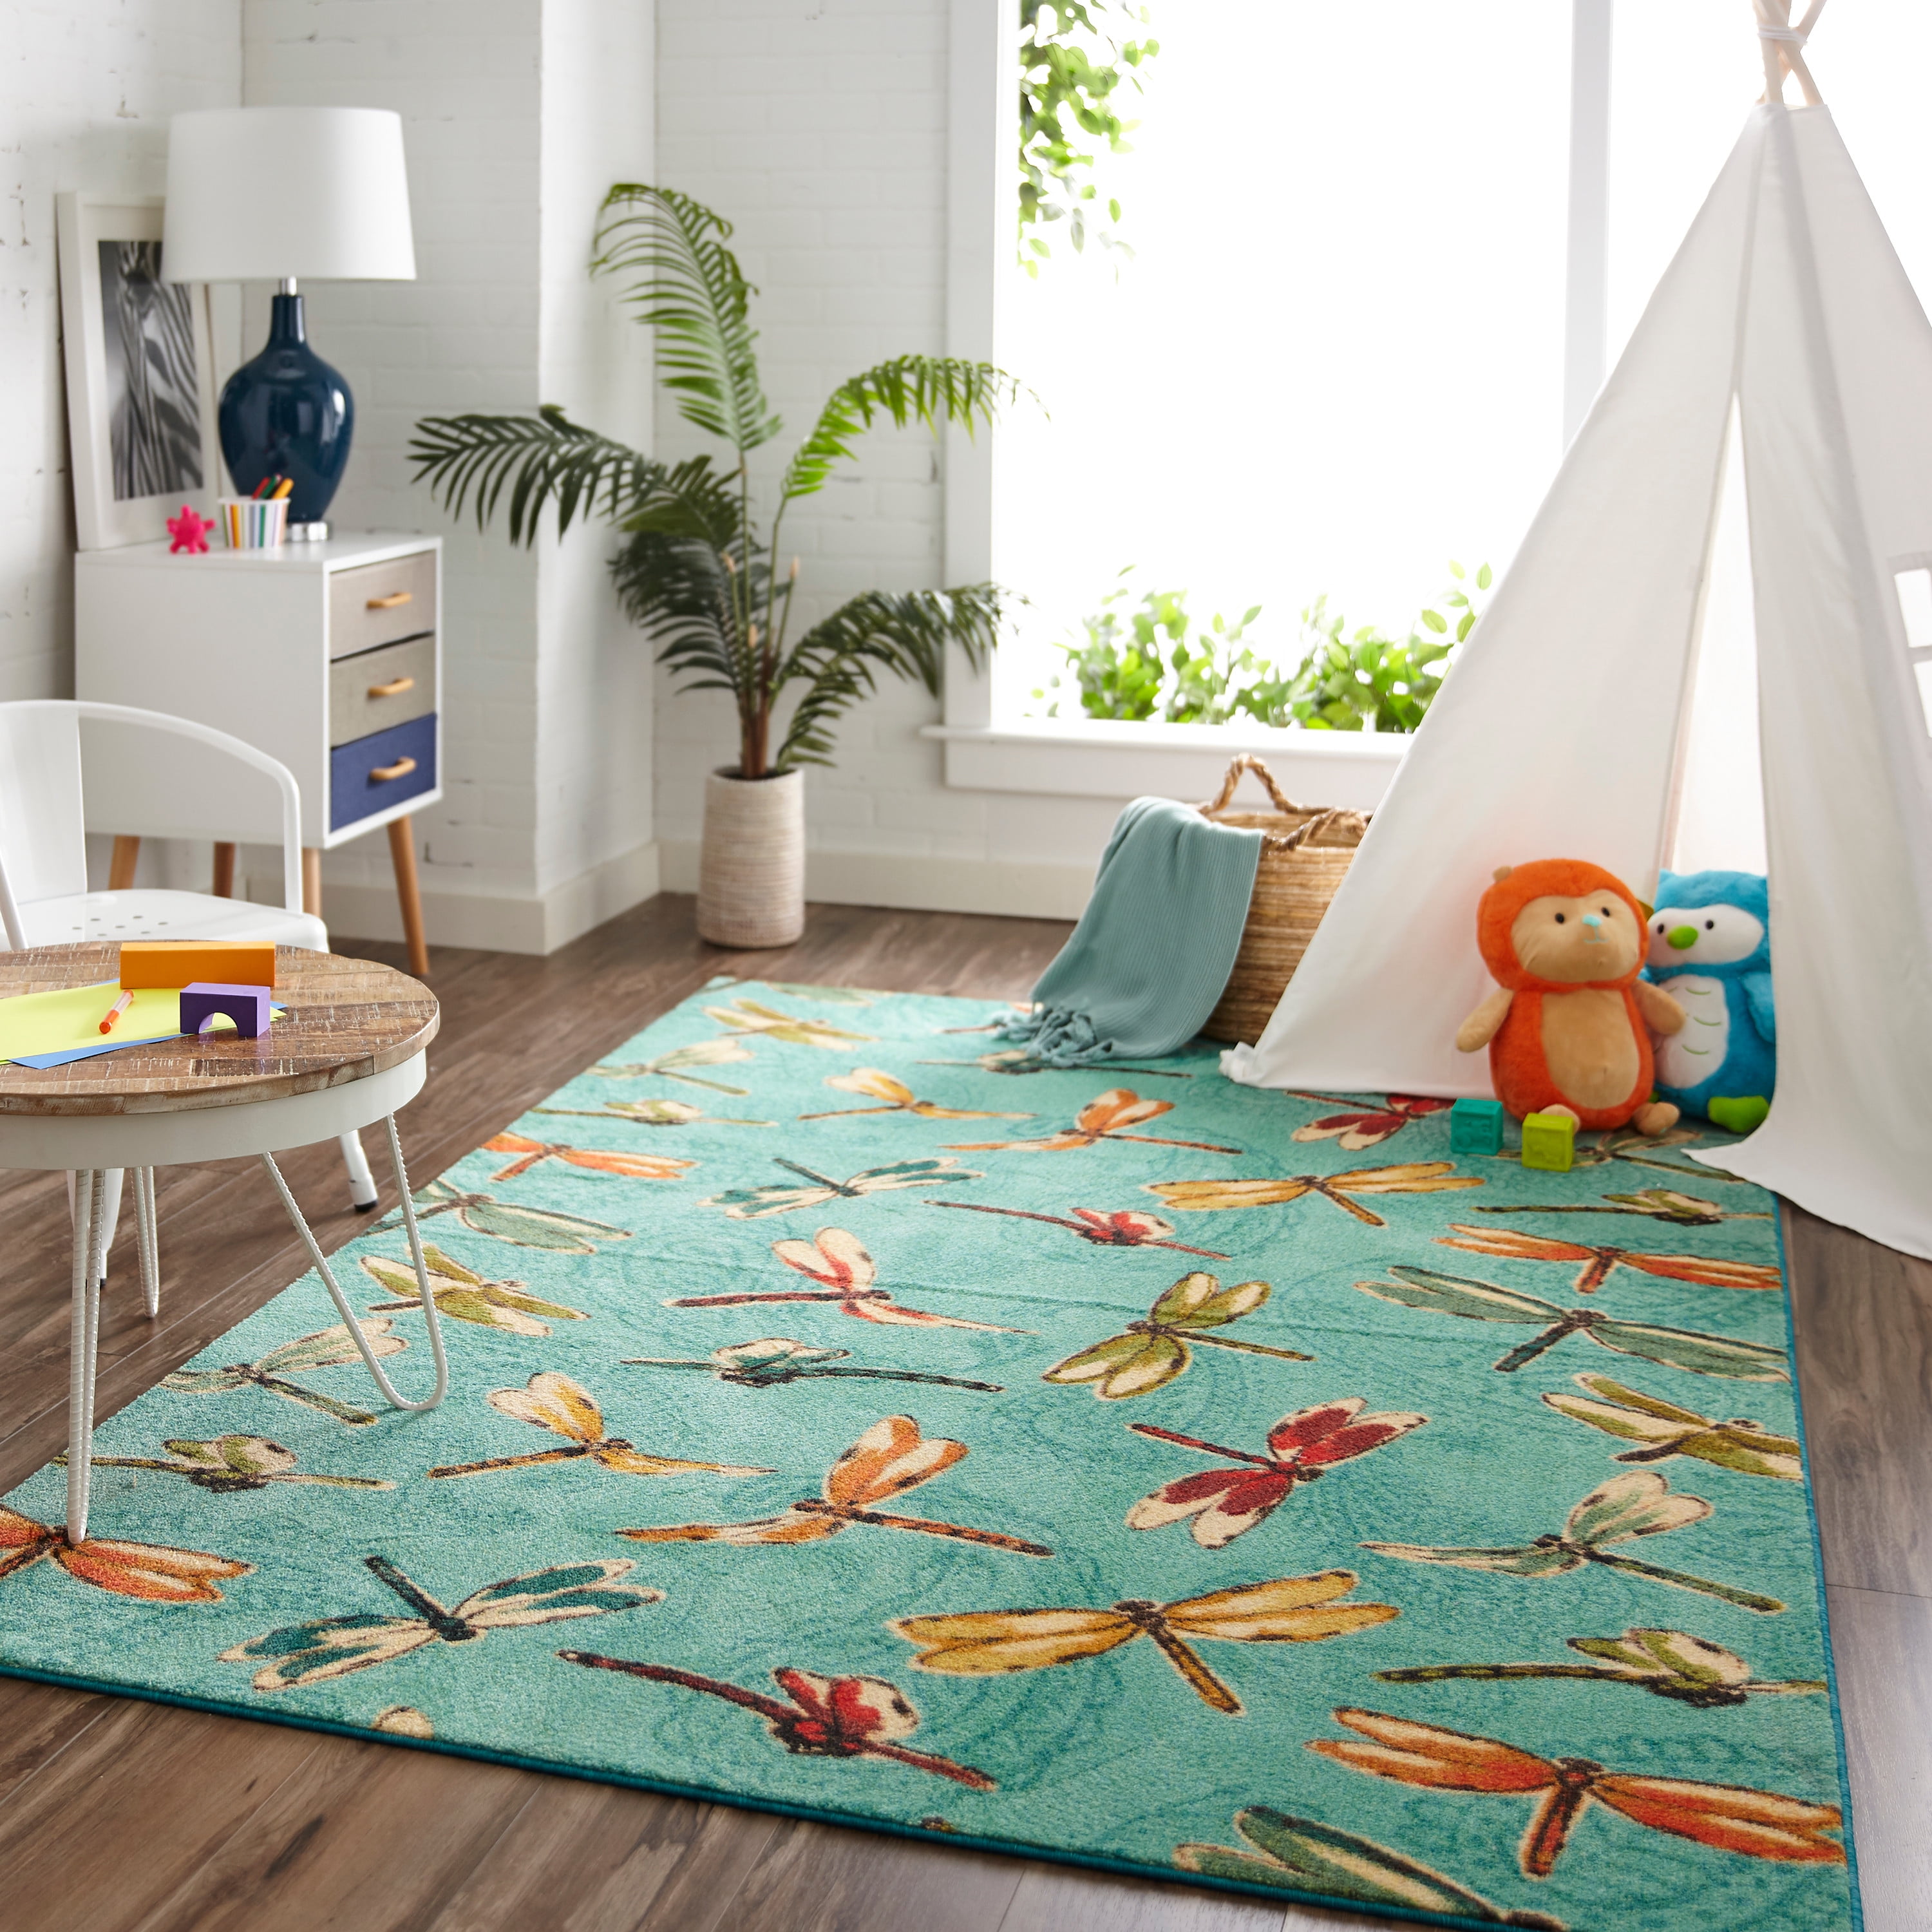 Home and Living Bedroom Dragonflies on Black Floor Carpet Rug Made to Order Indoor Area Rug Rug for Living Room Outdoor Custom Made